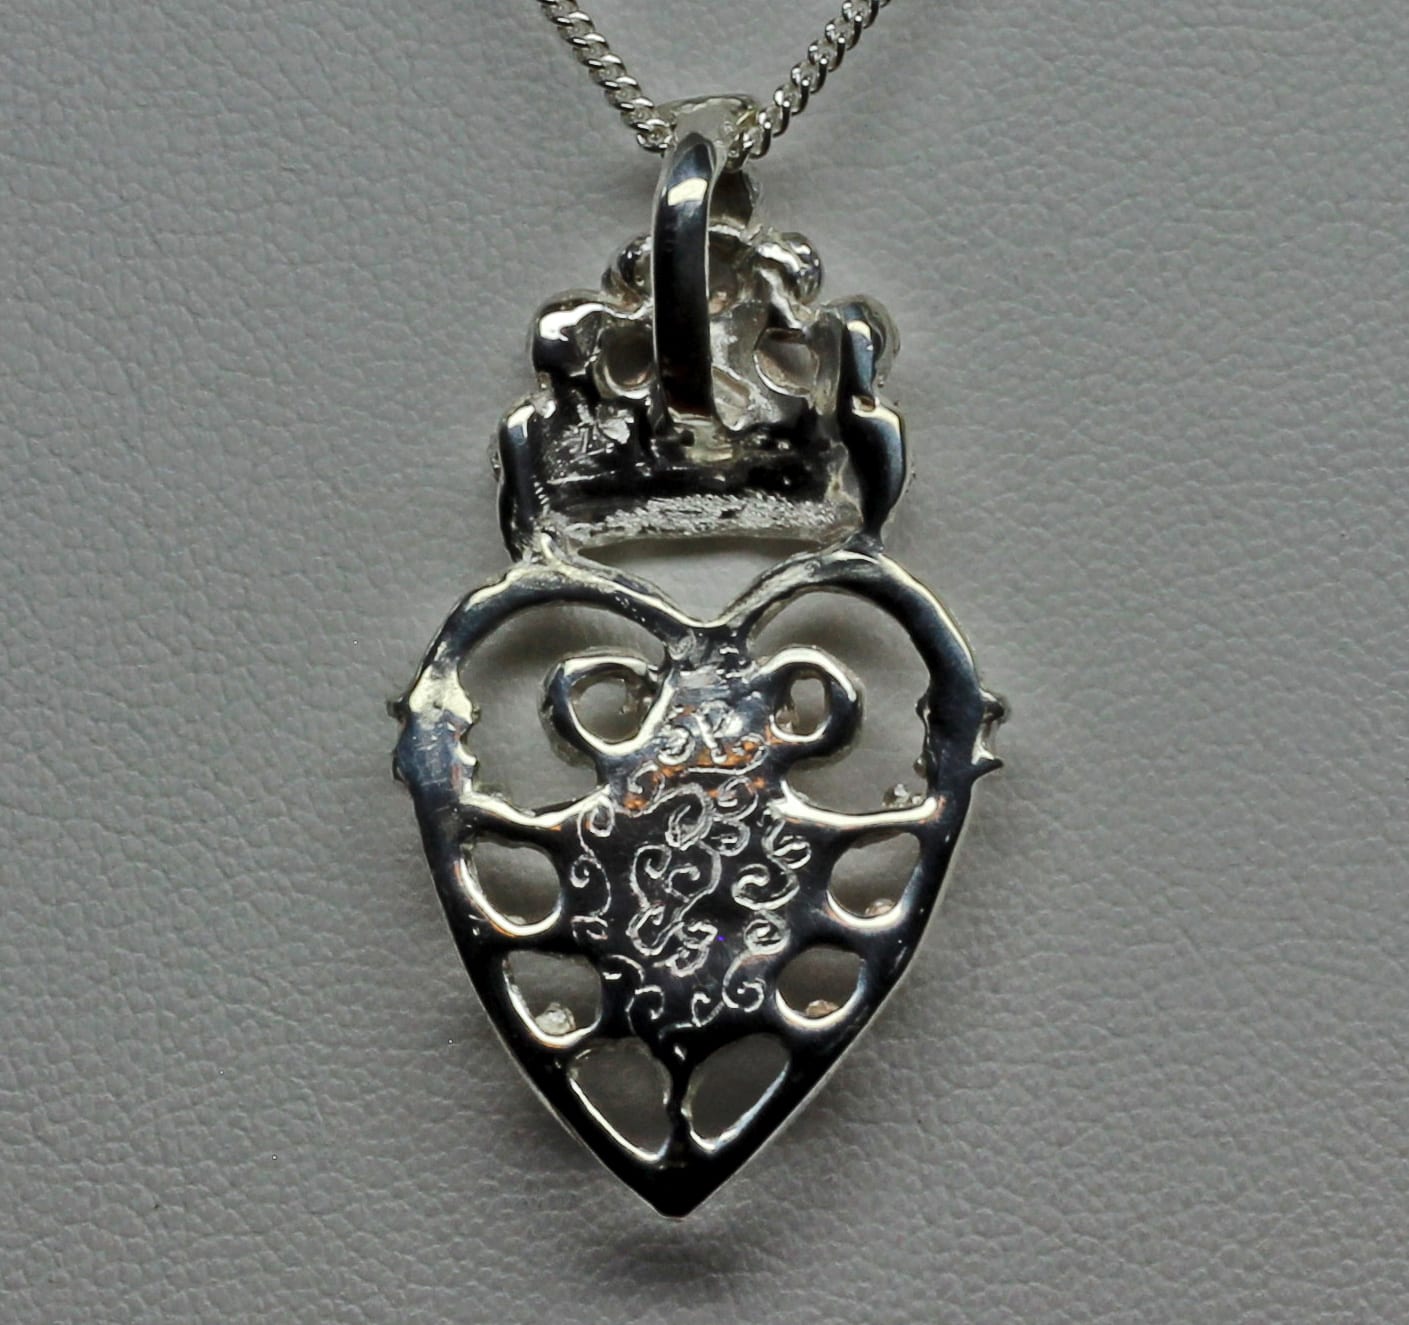 Thistle and leaf Luckenbooth pendant, insilver, by Suzan,